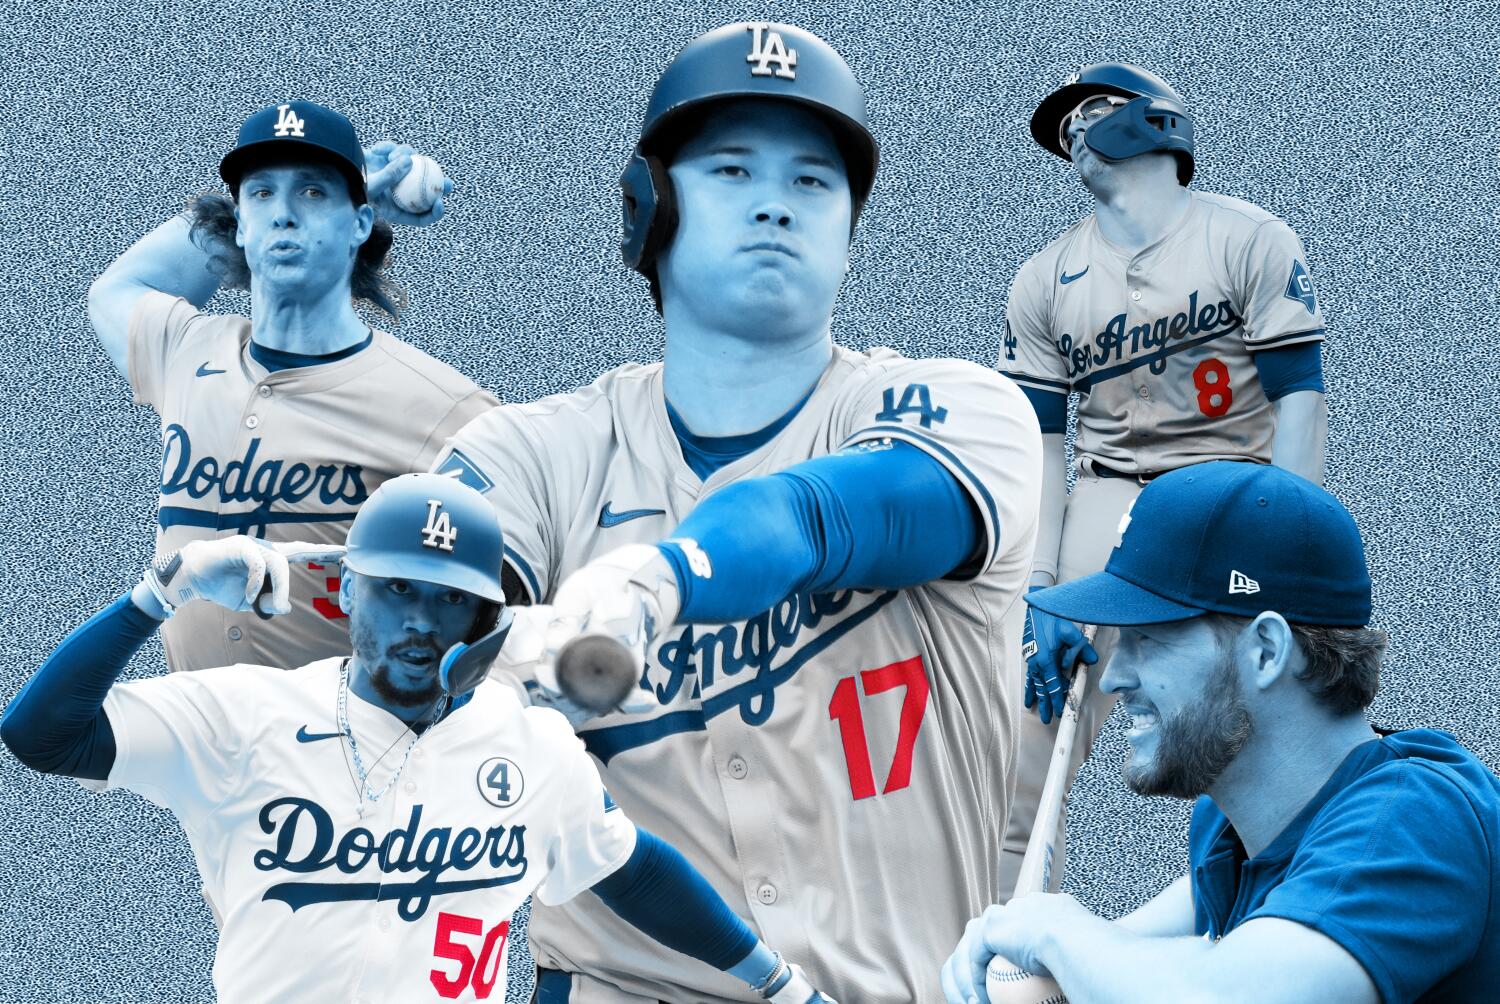 What's in store for the Dodgers in the second half? Here are 10 storylines to watch